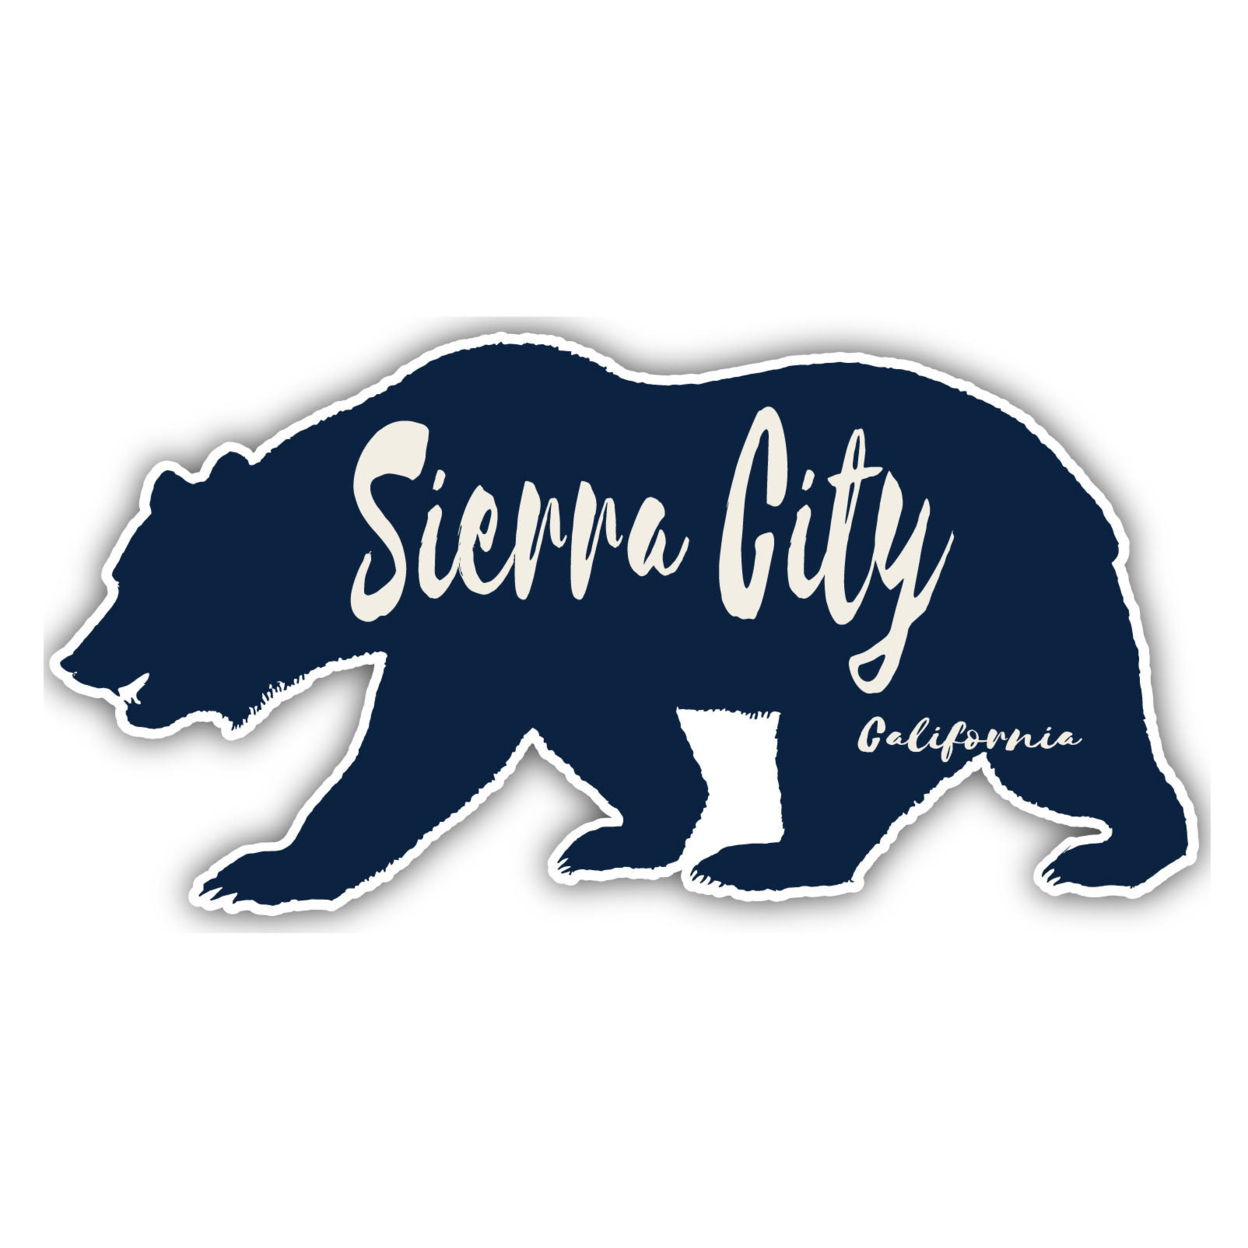 Sierra City California Souvenir Decorative Stickers (Choose Theme And Size) - Single Unit, 2-Inch, Great Outdoors